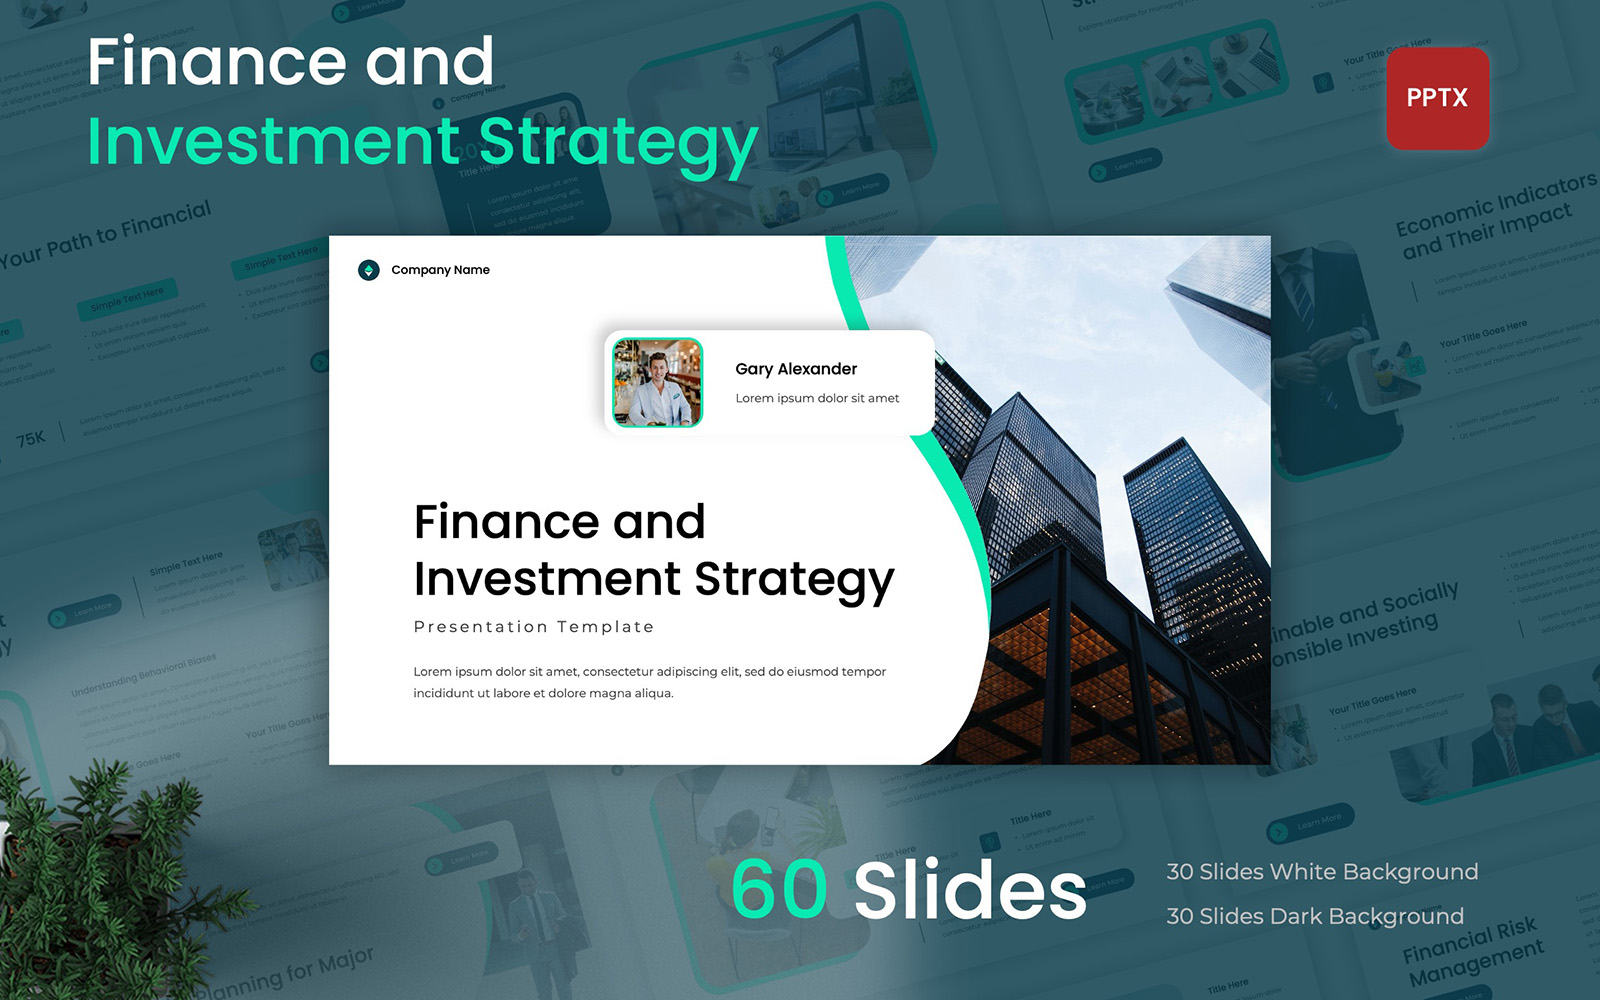 Finance and Investment Strategy PowerPoint Template